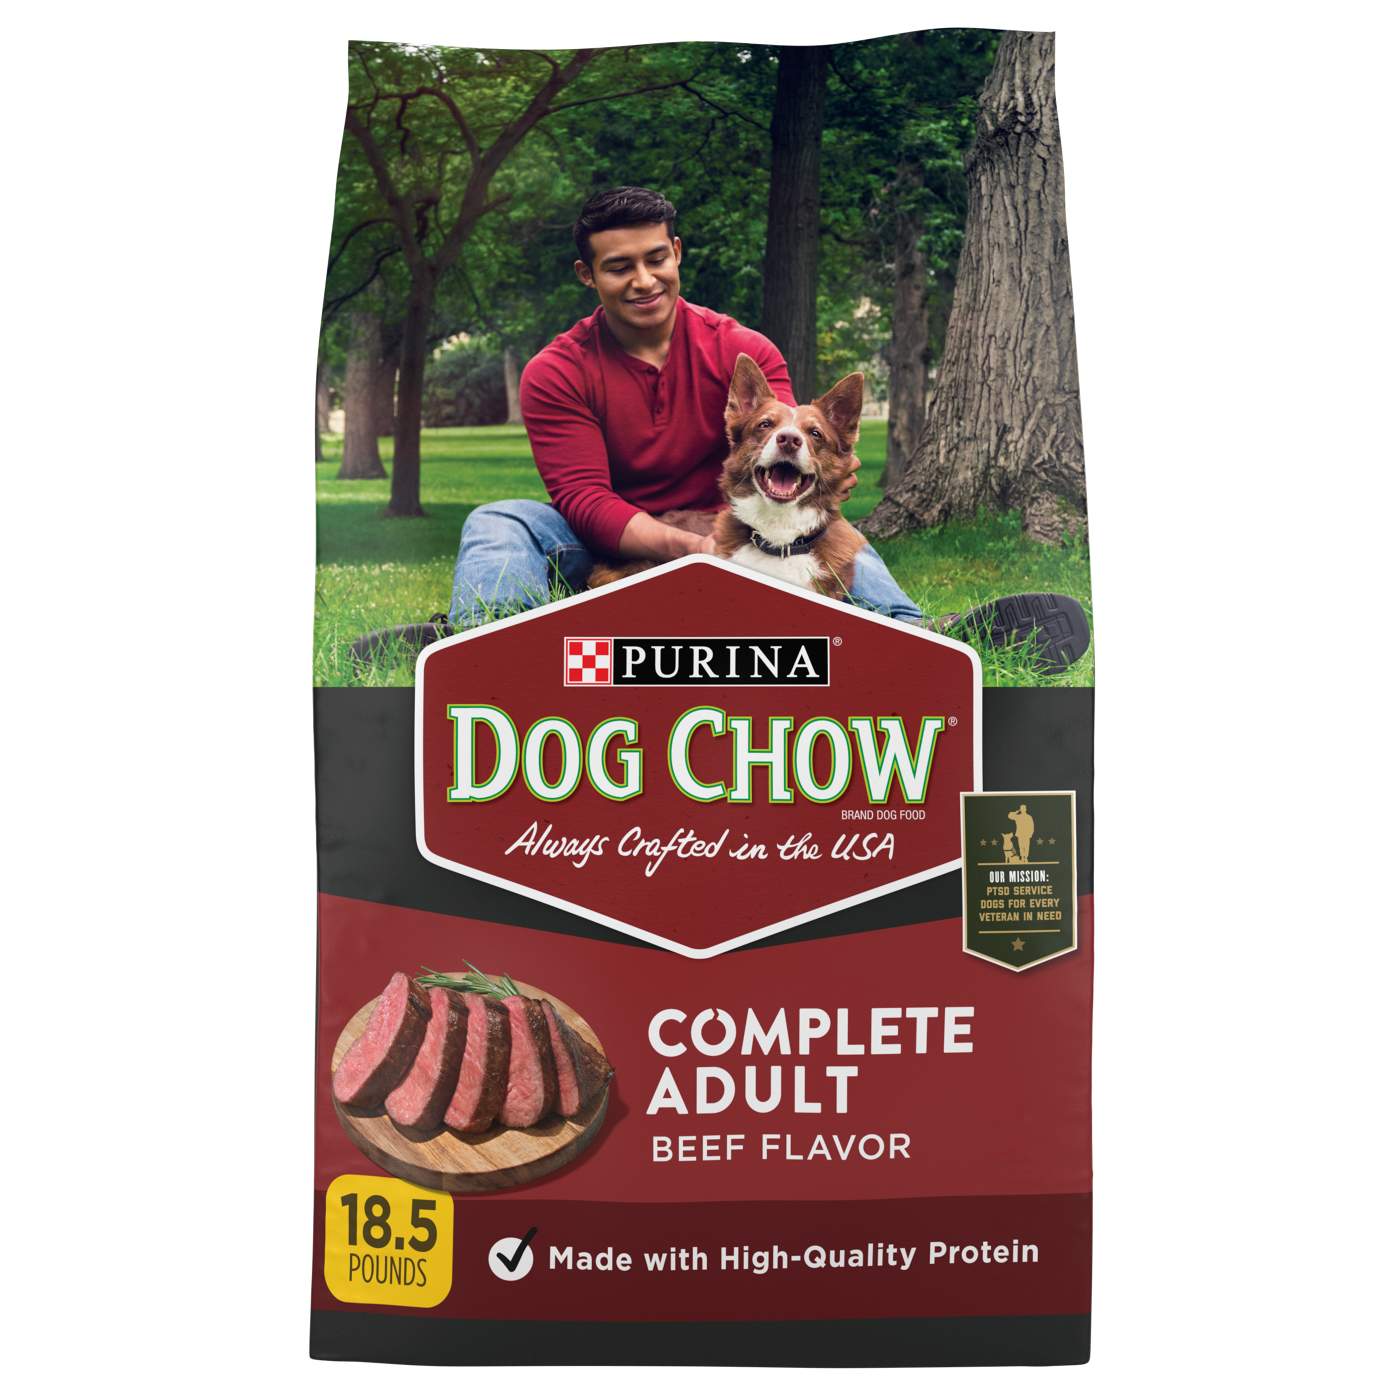 Dog Chow Purina Dog Chow Complete Adult Dry Dog Food Kibble Beef Flavor; image 1 of 7